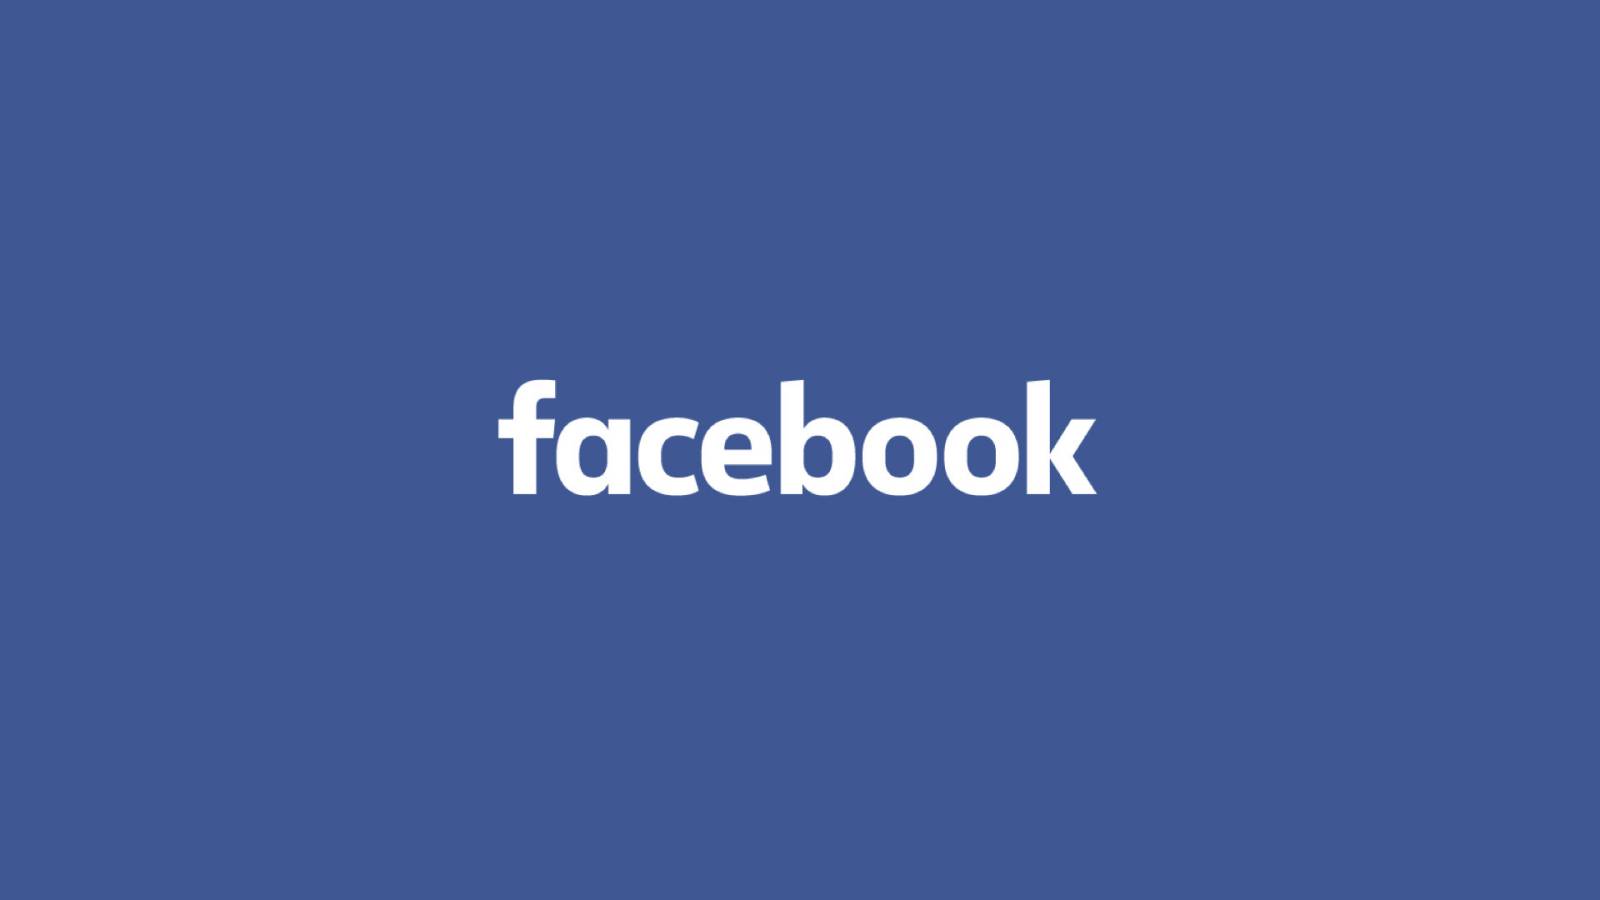 Facebook Changes New Updates for Mobile Phones